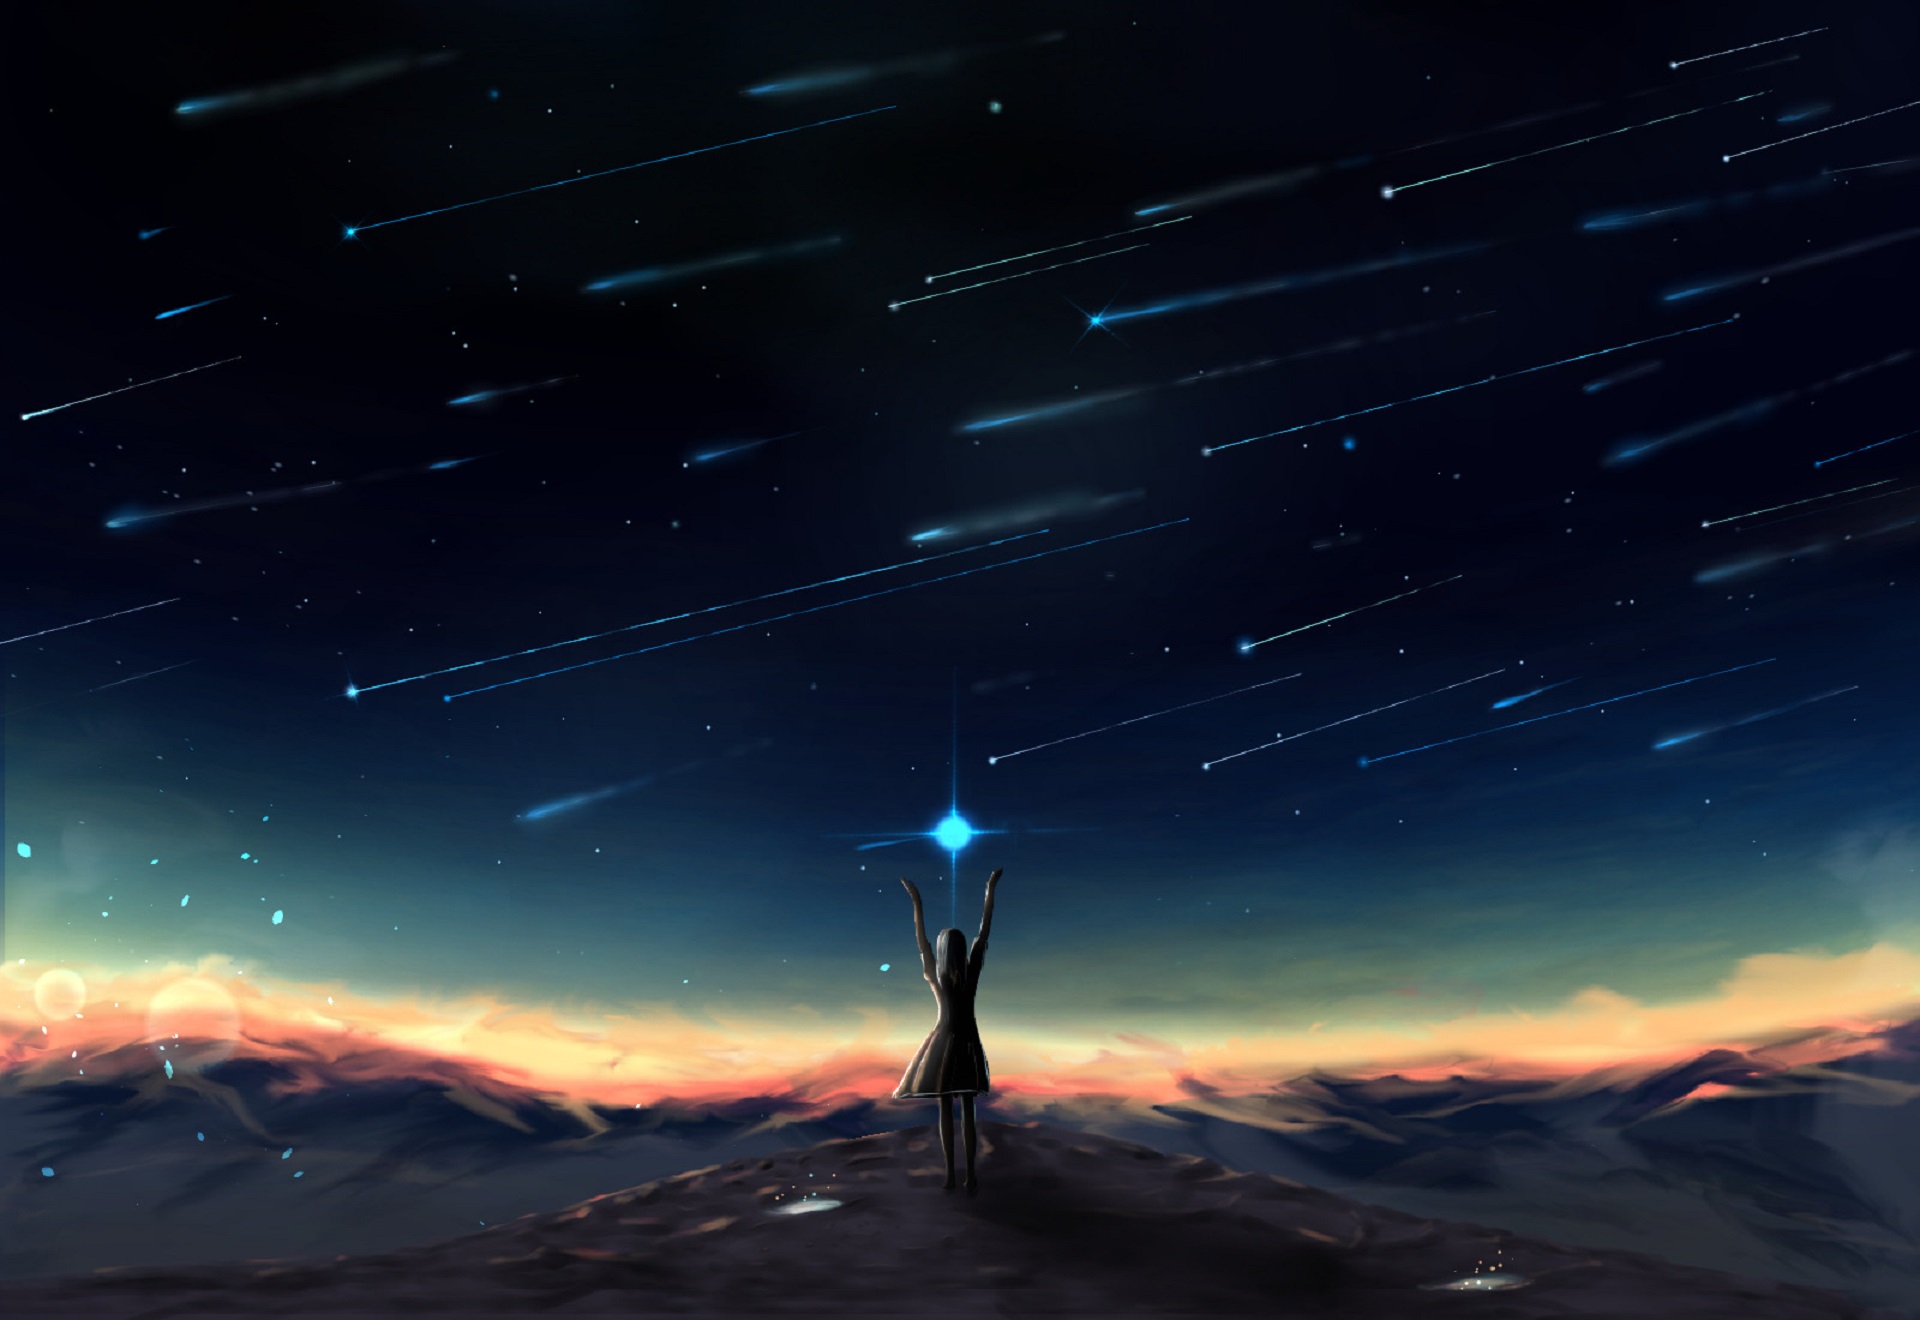 Touching the star by adsuger